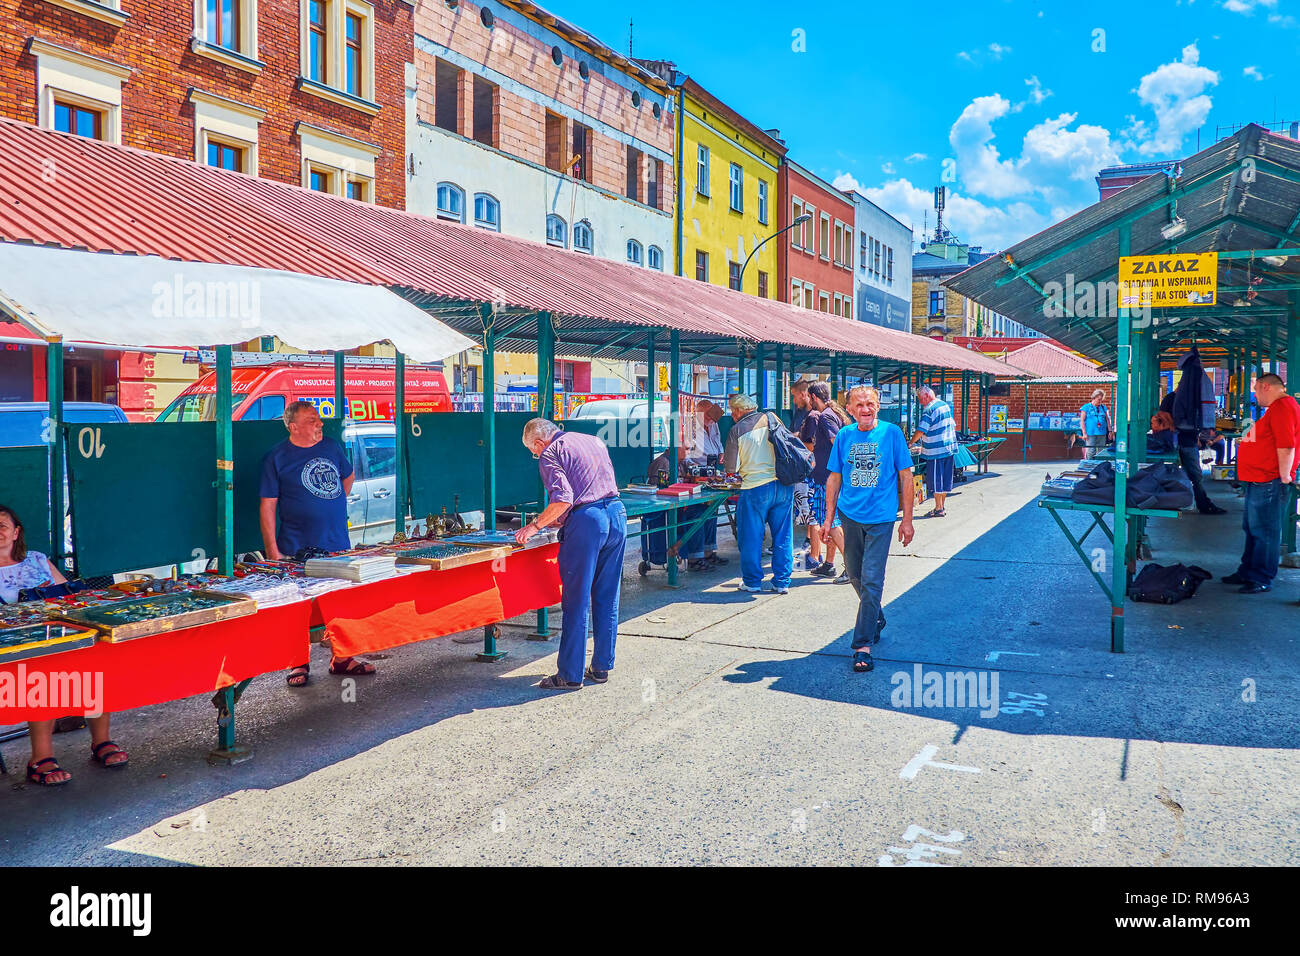 KRAKOW, POLAND - JUNE 21, 2018: The lines of covered stalls in New Square (Plac Nowy) serves as the small flea market with variety of old  souvenirs,  Stock Photo